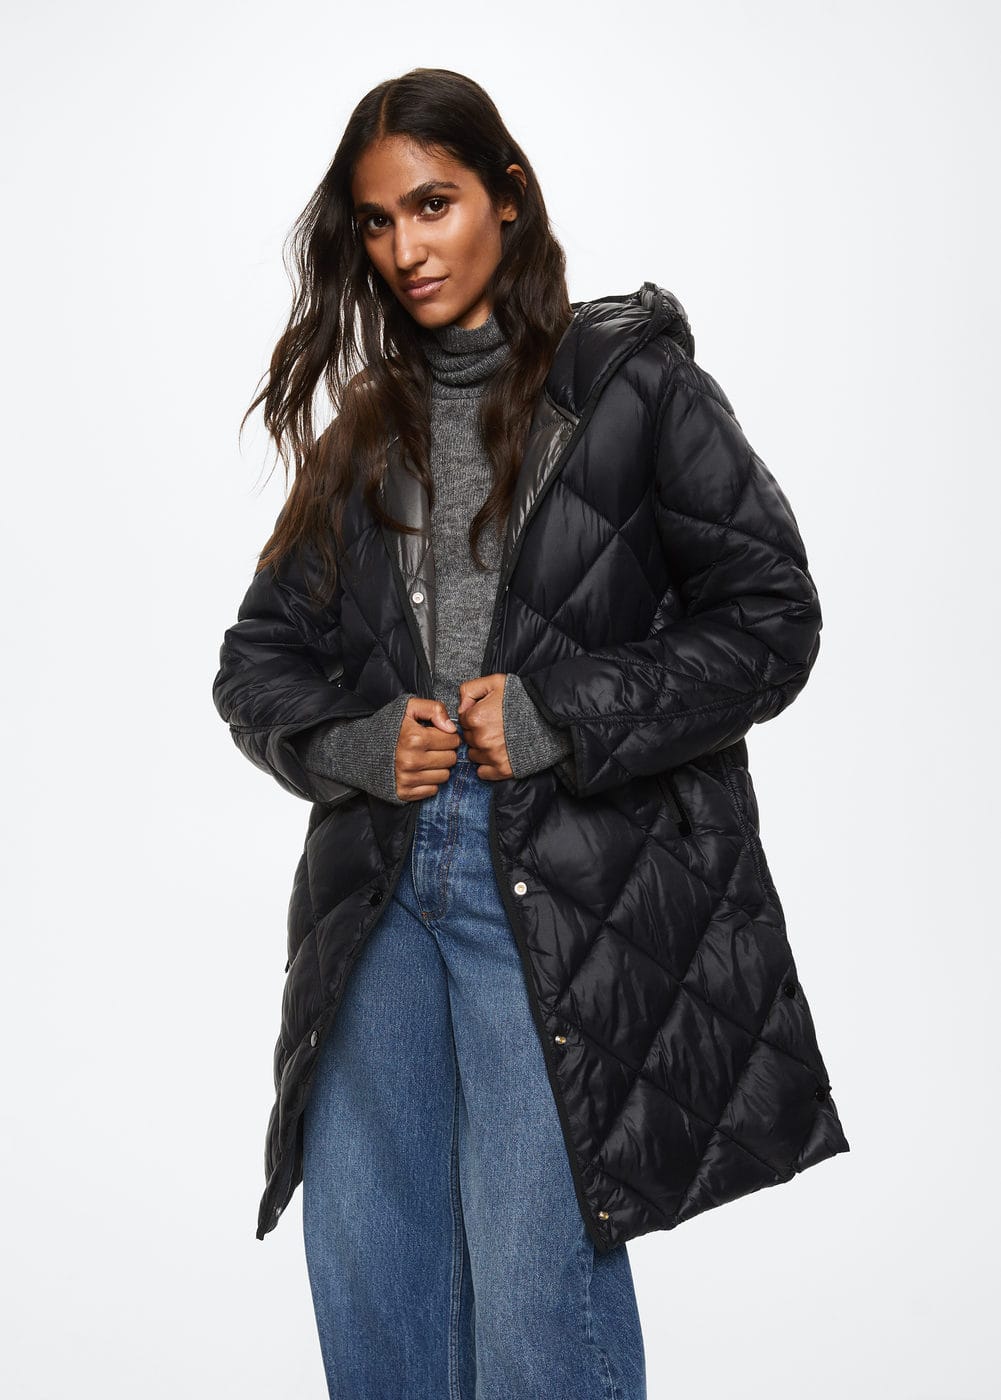 The 18 Best Puffer Jackets That Are So On-Trend This Year | Who What Wear